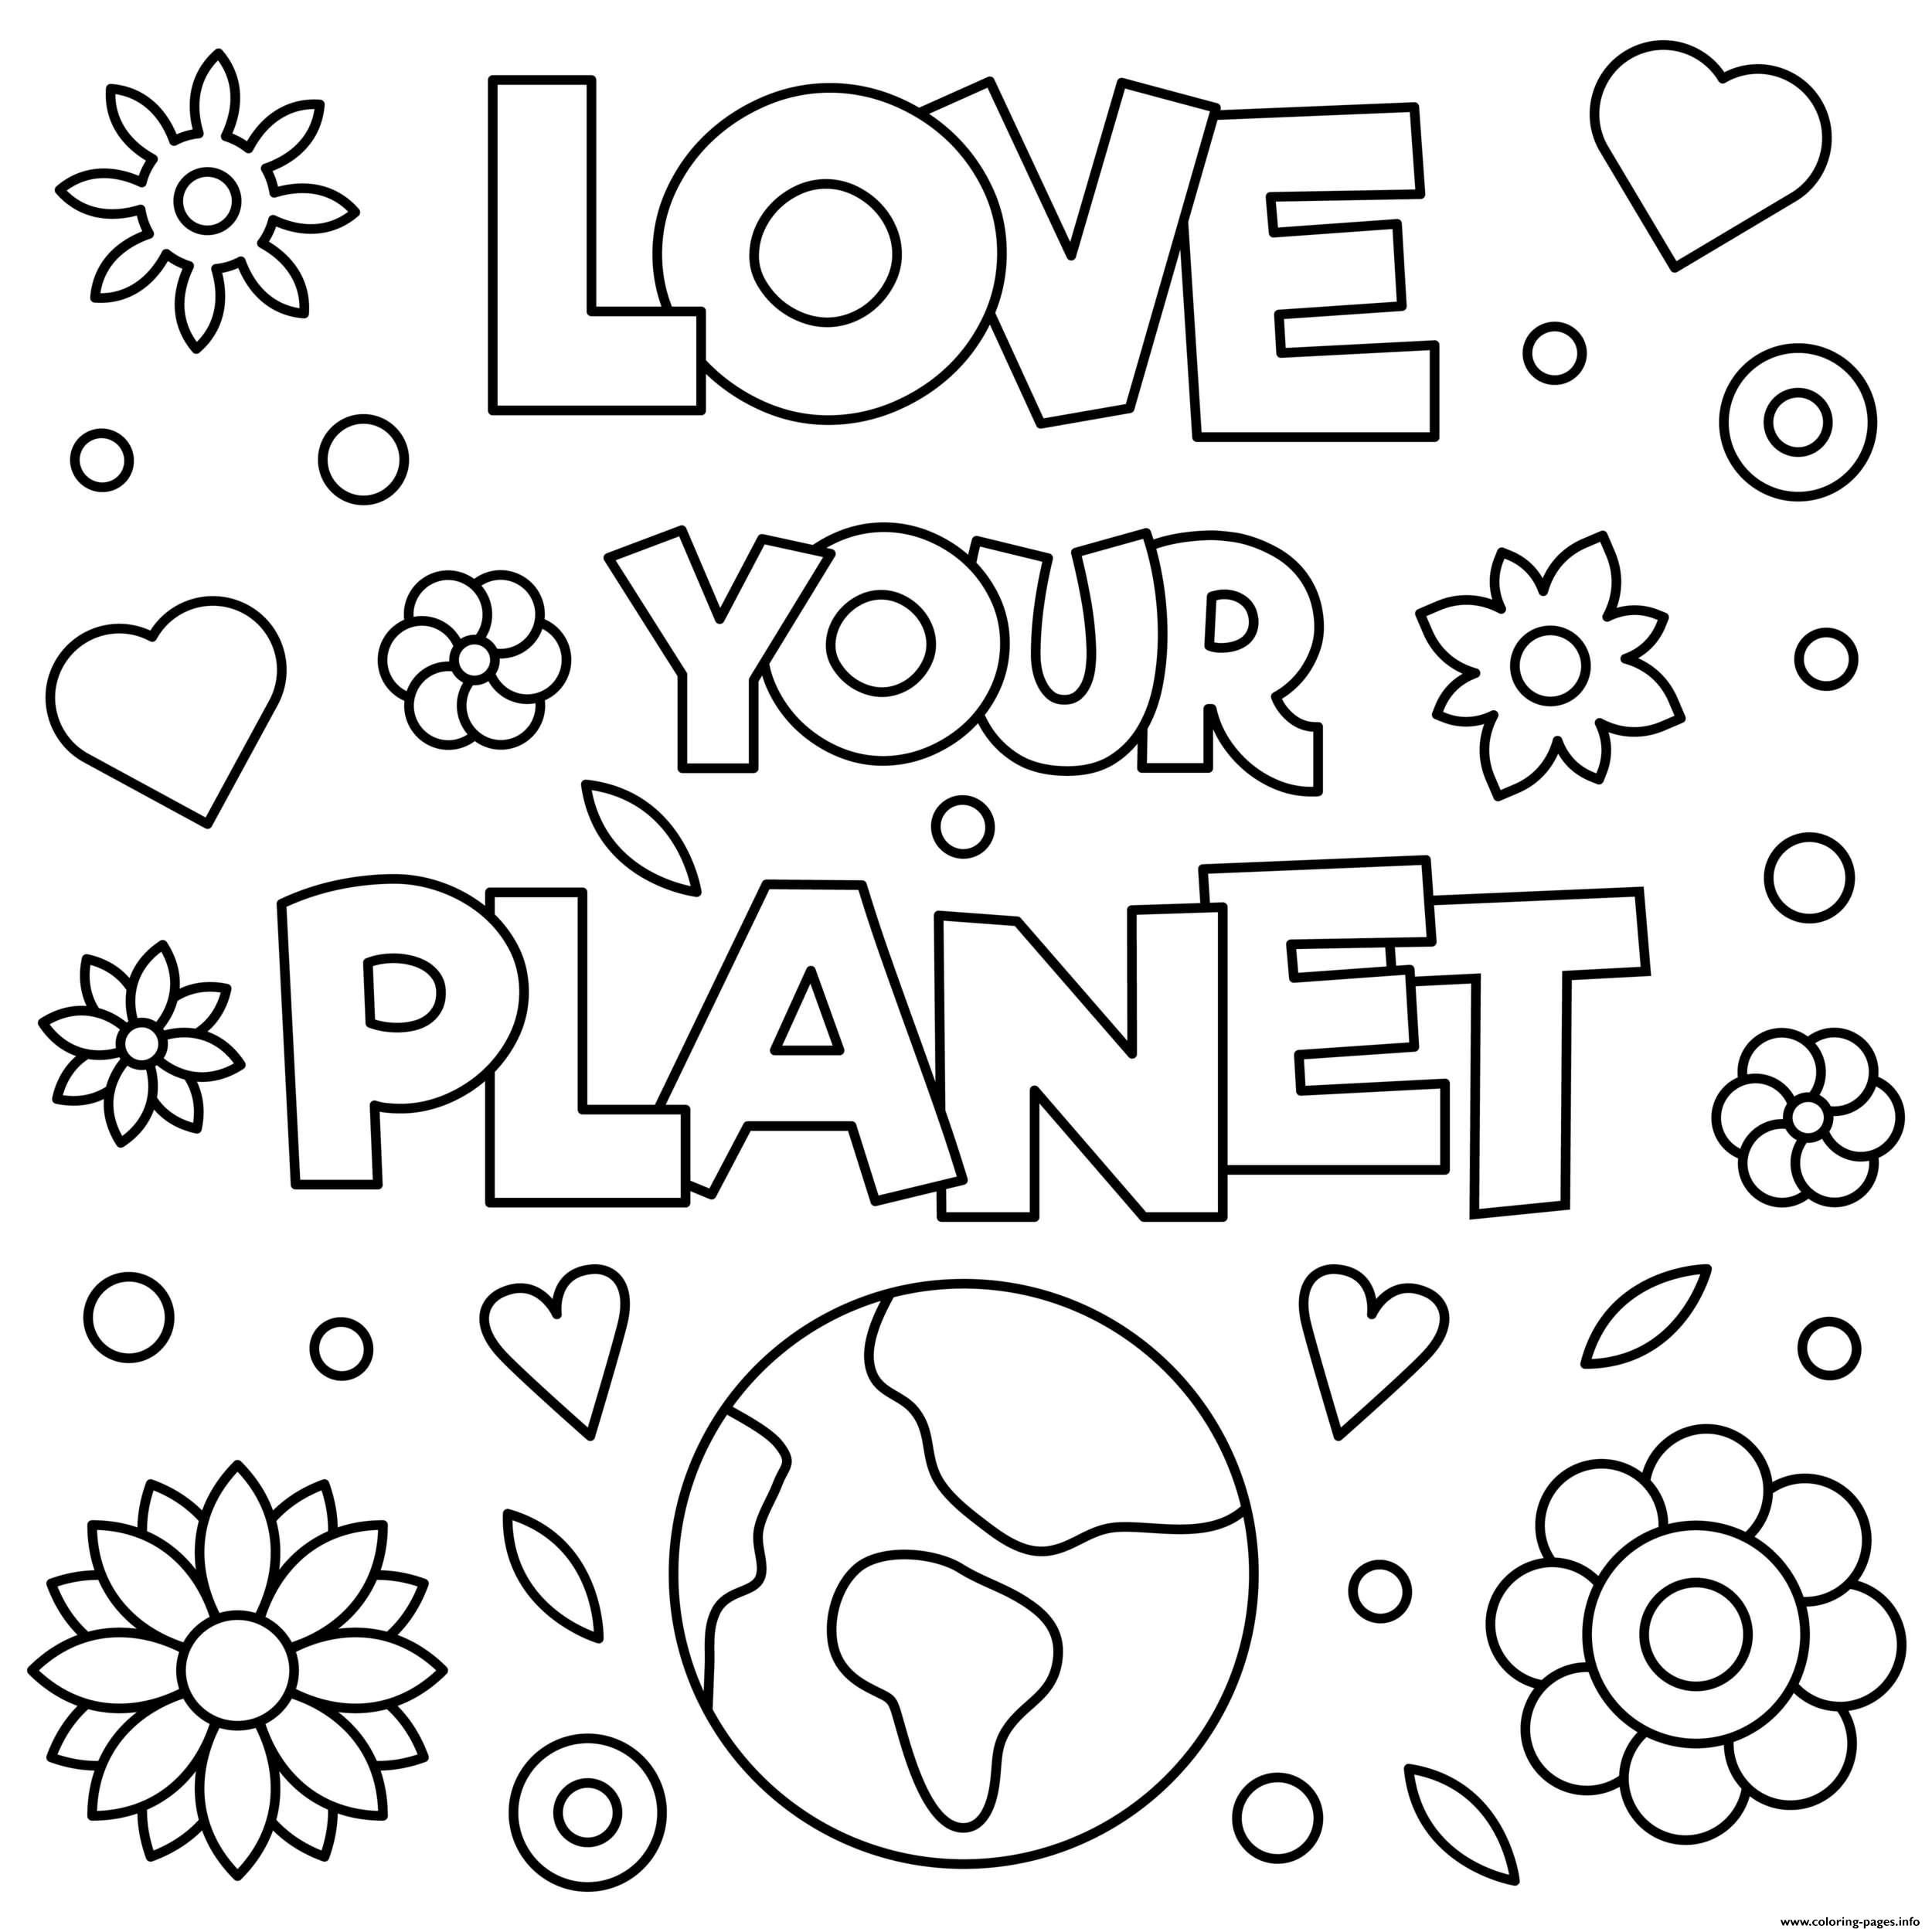 Love Your Planet Earth Day April Coloring Pages Printable Tremendous Sheets  | Earth day coloring pages, Planet coloring pages, Printable coloring pages